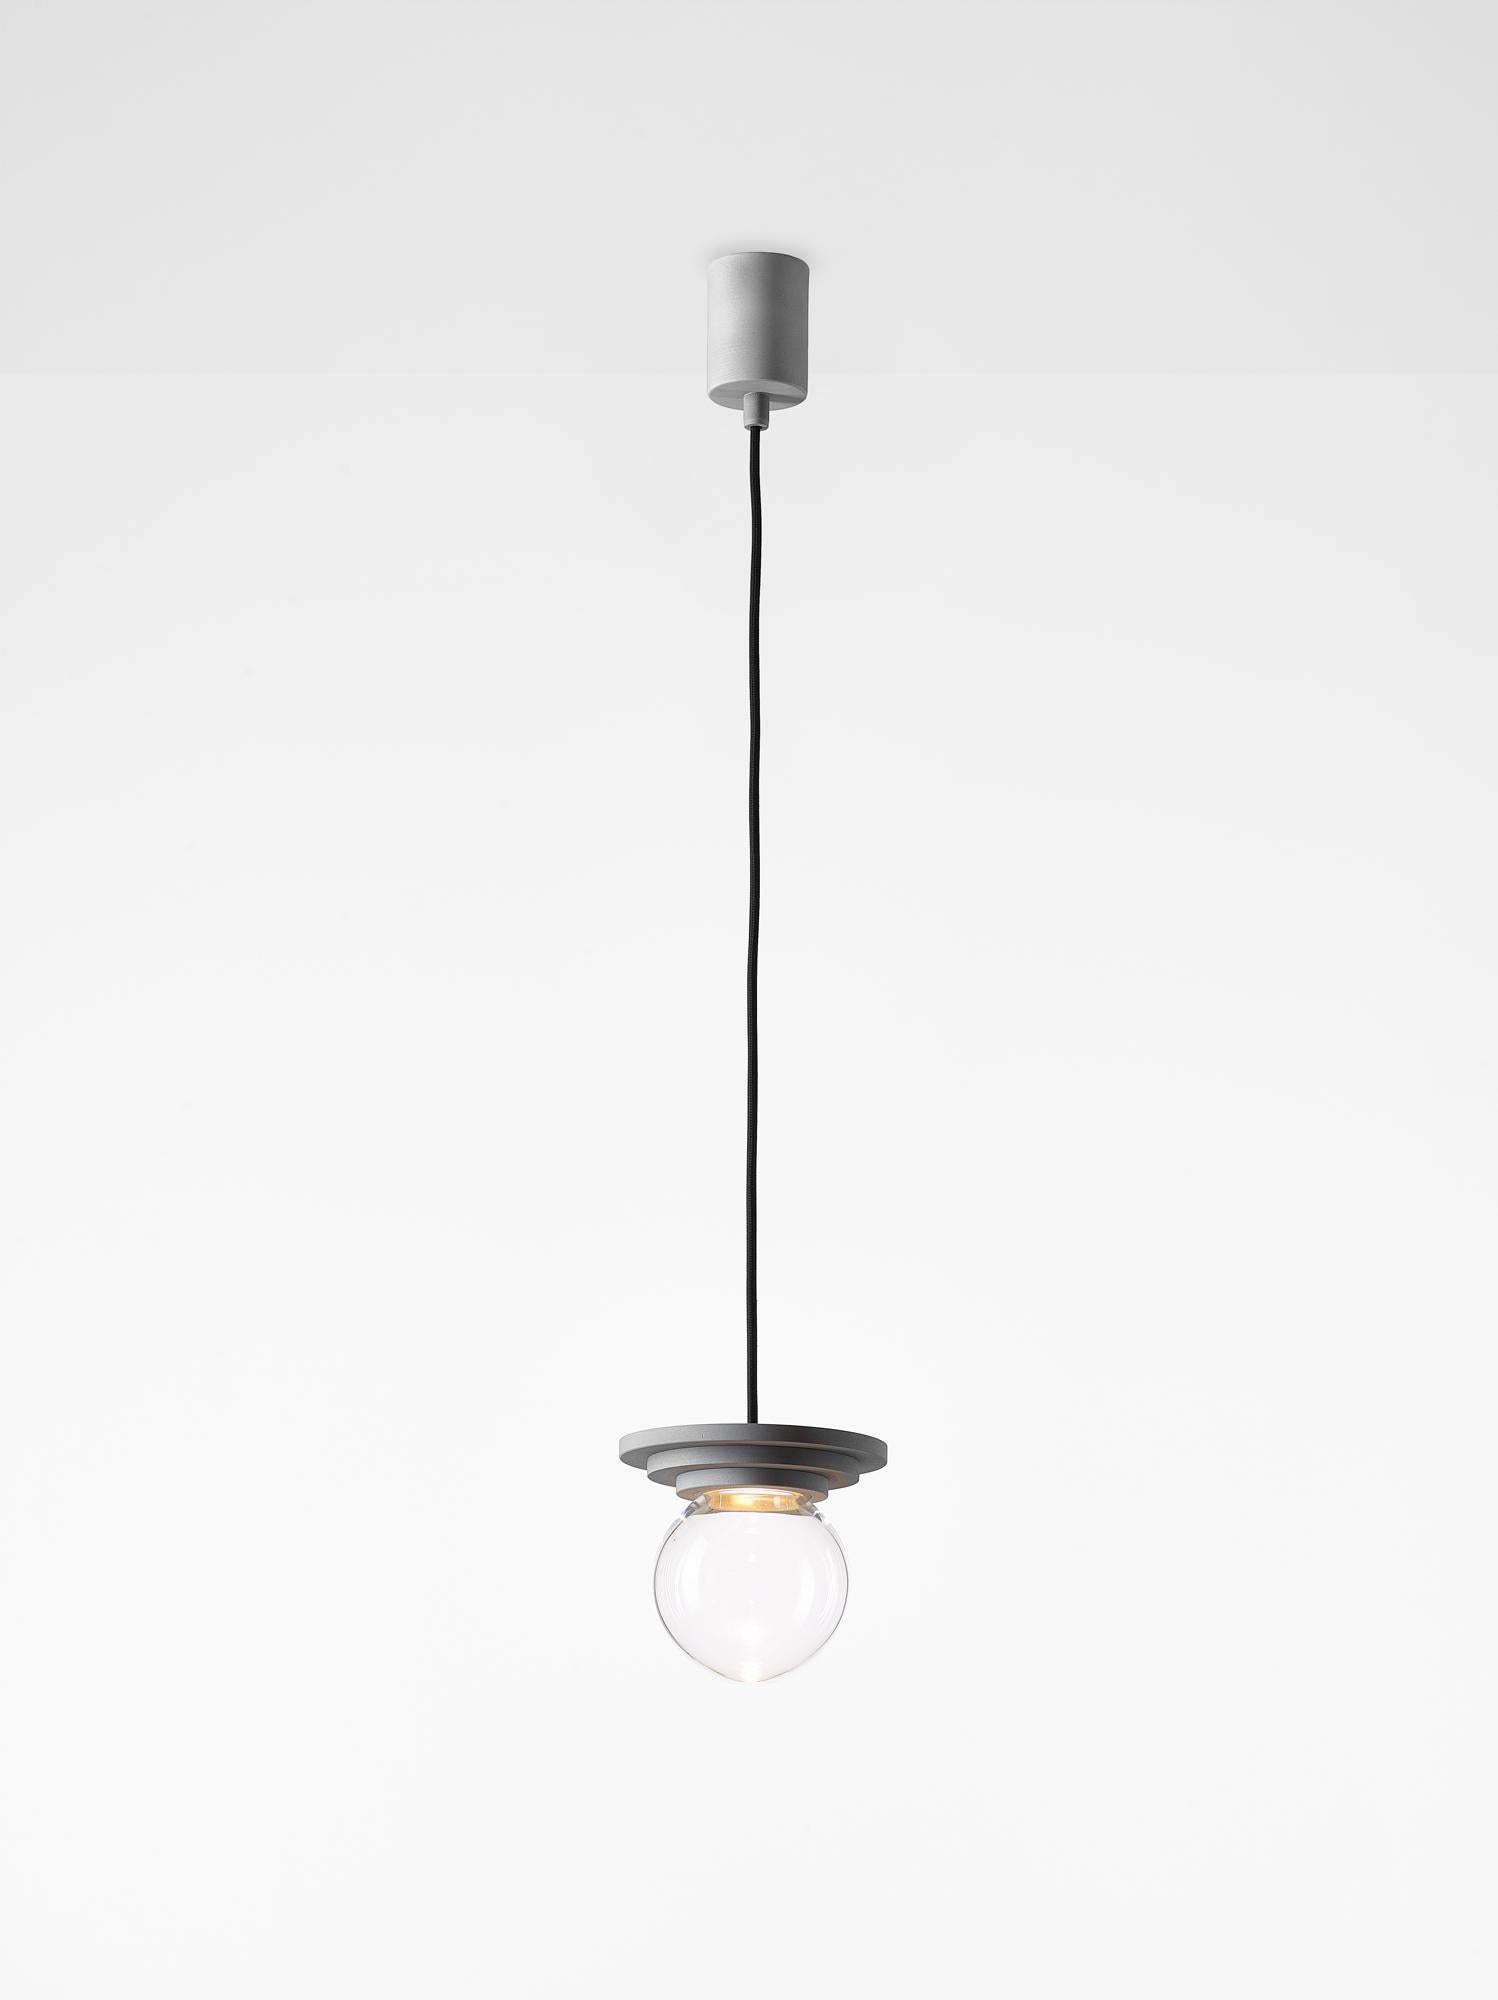 Silver and Clear Stratos Mini Ball Pendant Light by Dechem Studio
Dimensions: D 12 x H 14 cm
Materials: Aluminum, Glass.
Also Available: Different colours available.

Different shapes of capsules and spheres contrast with anodized alloy